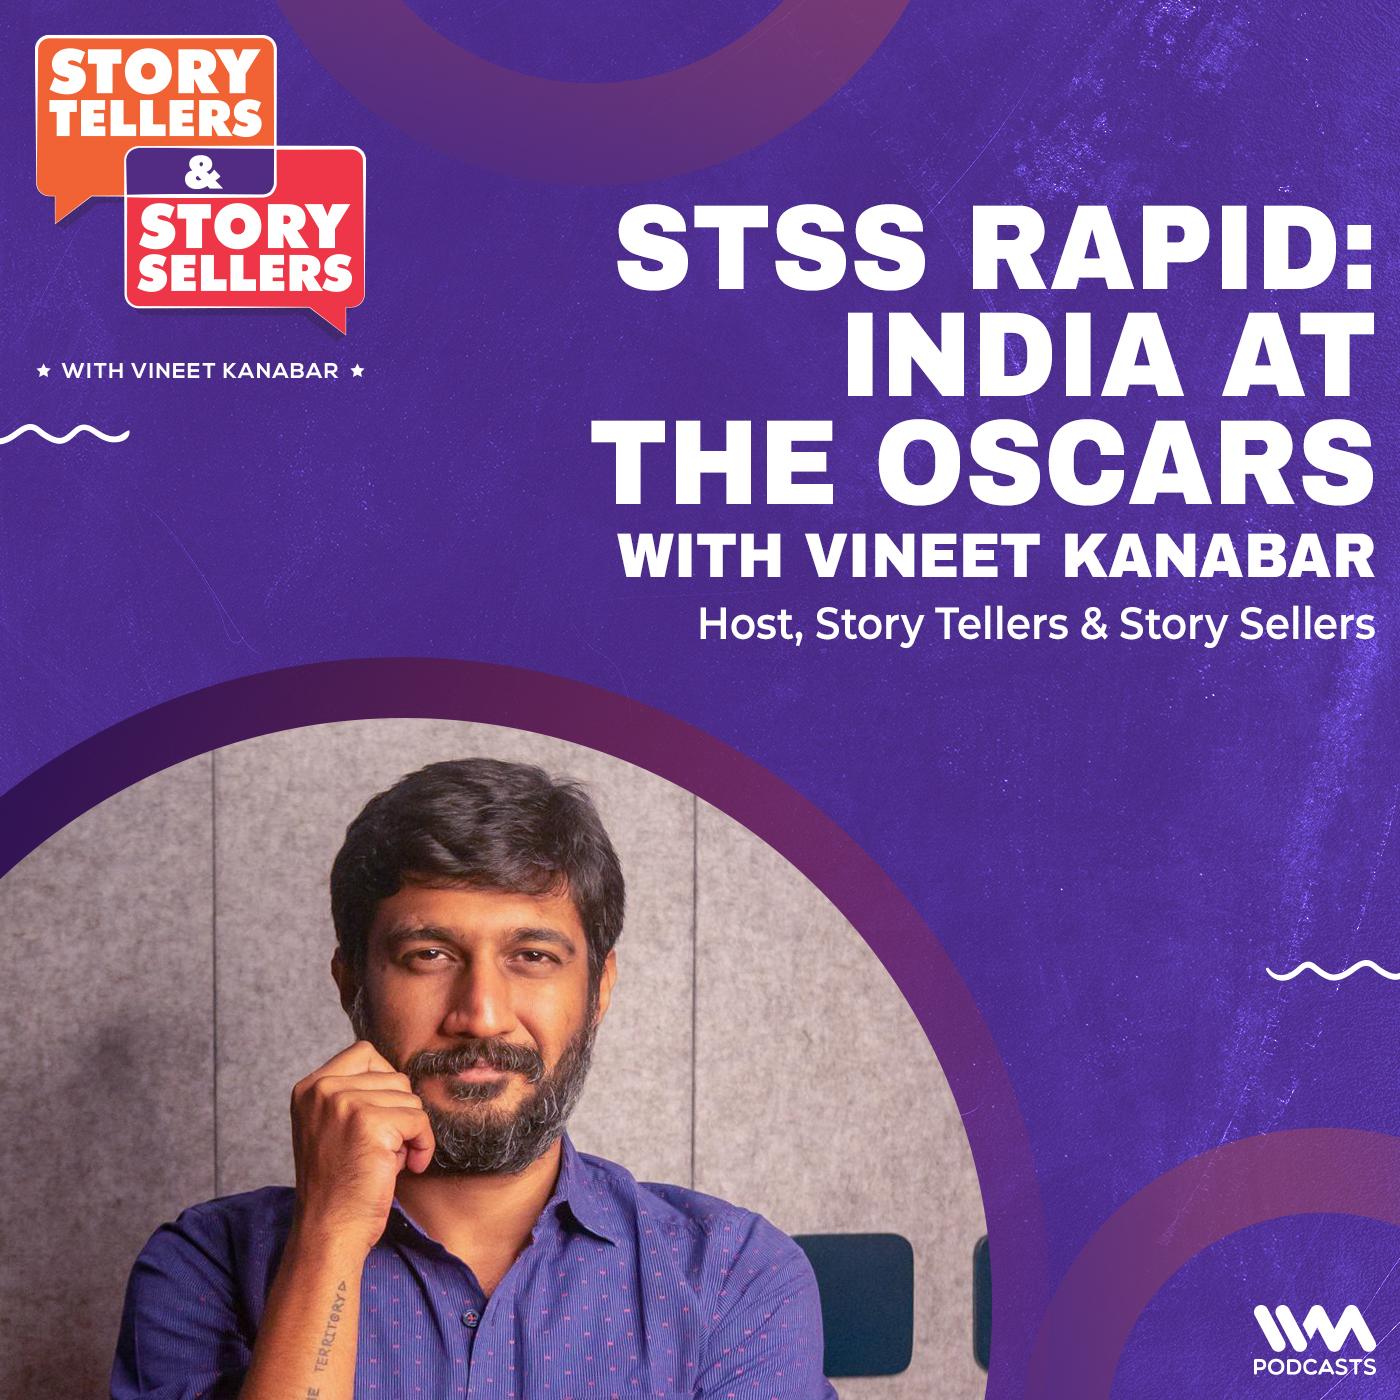 STSS Rapid: India at the Oscars